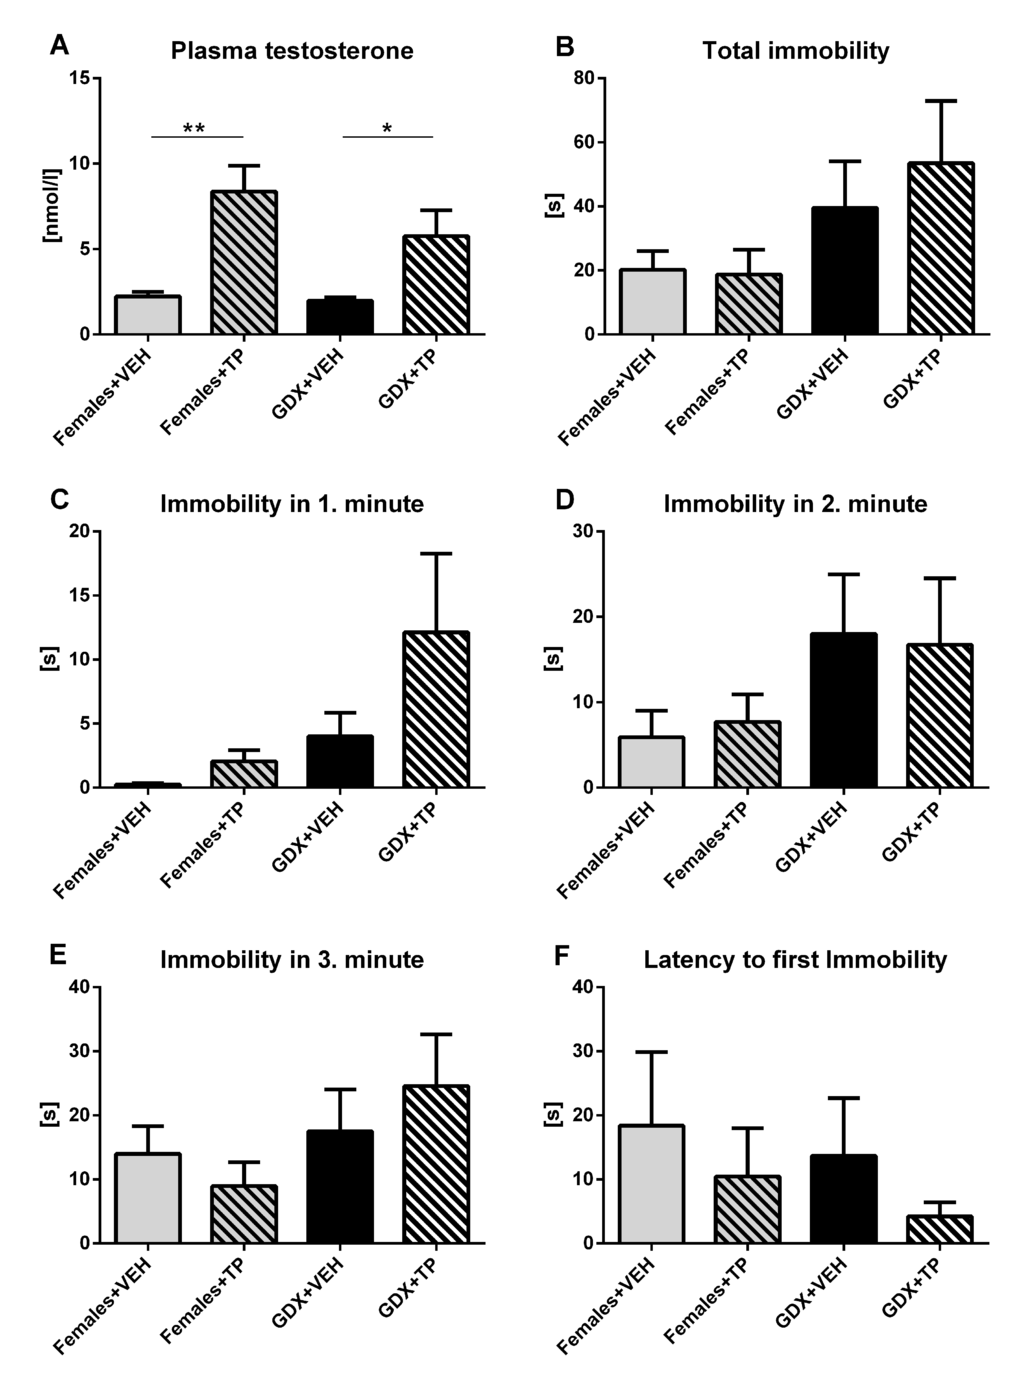 Immobility duration in forced swim test after acute testosterone treatment. (A) Plasma testosterone concentration 30 minutes after acute treatment with olive oil vehicle (VEH) or testosterone propionate (TP) in aged GDX males and aged females. Acute testosterone treatment caused an increase in plasma testosterone concentration in both GDX males and females compared to their vehicle treated controls (pB) Immobility time in the forced swim test during the 3 min testing period, (C) immobility duration in the 1st min, (D) 2nd min, (E) 3rd min and (F) the latency to first immobility without any significant differences in observed behavioral parameters between groups. Values are expressed as means + SEM. *p